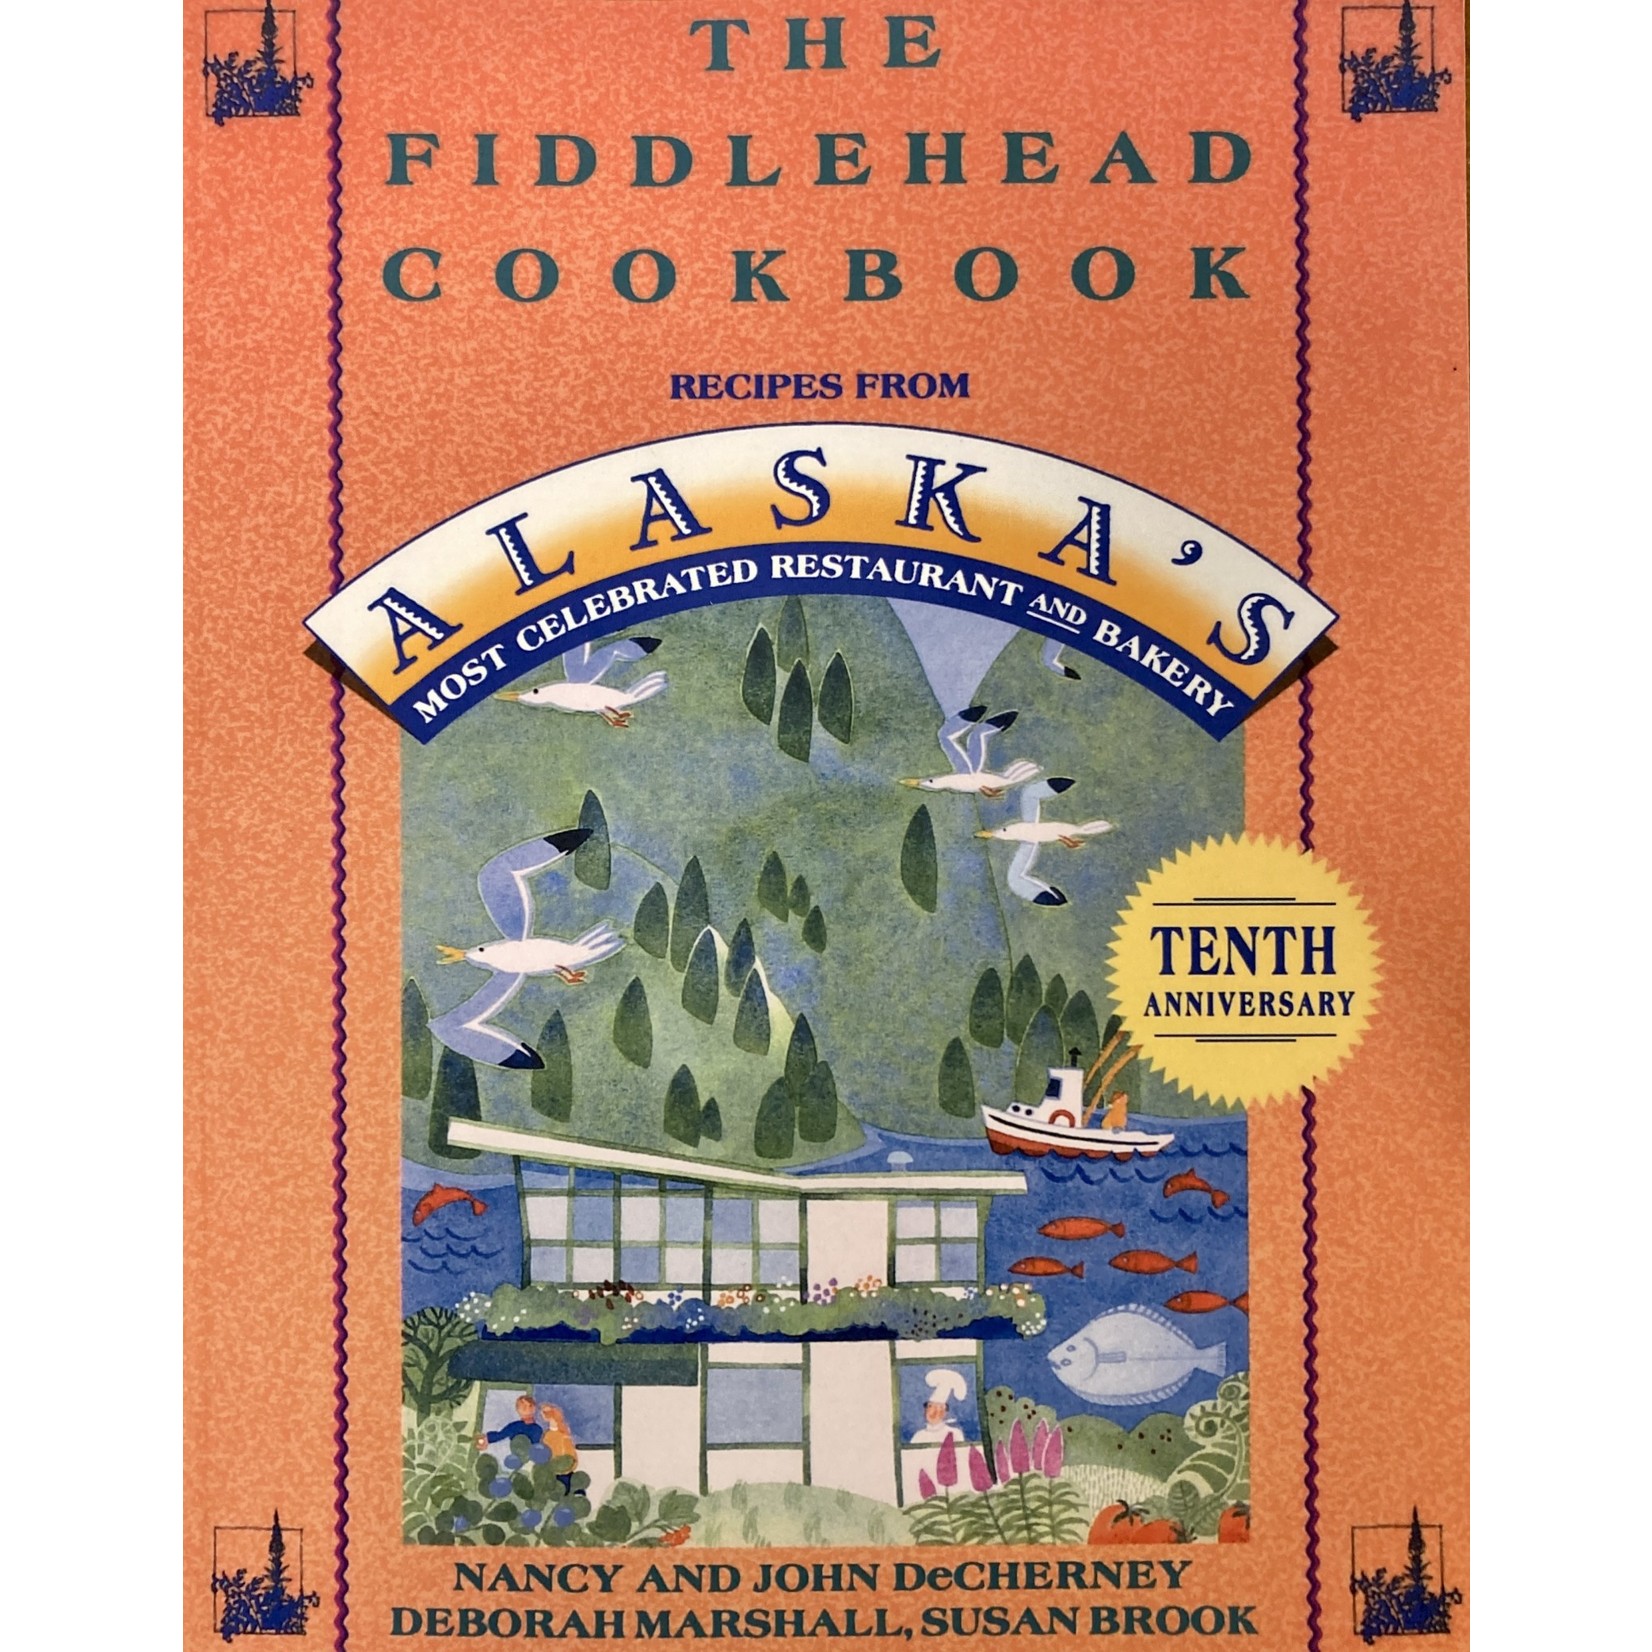 DeCherney Marshall and Brook The Fiddlehead Cookbook | DeCherney, Marshall, and Brook